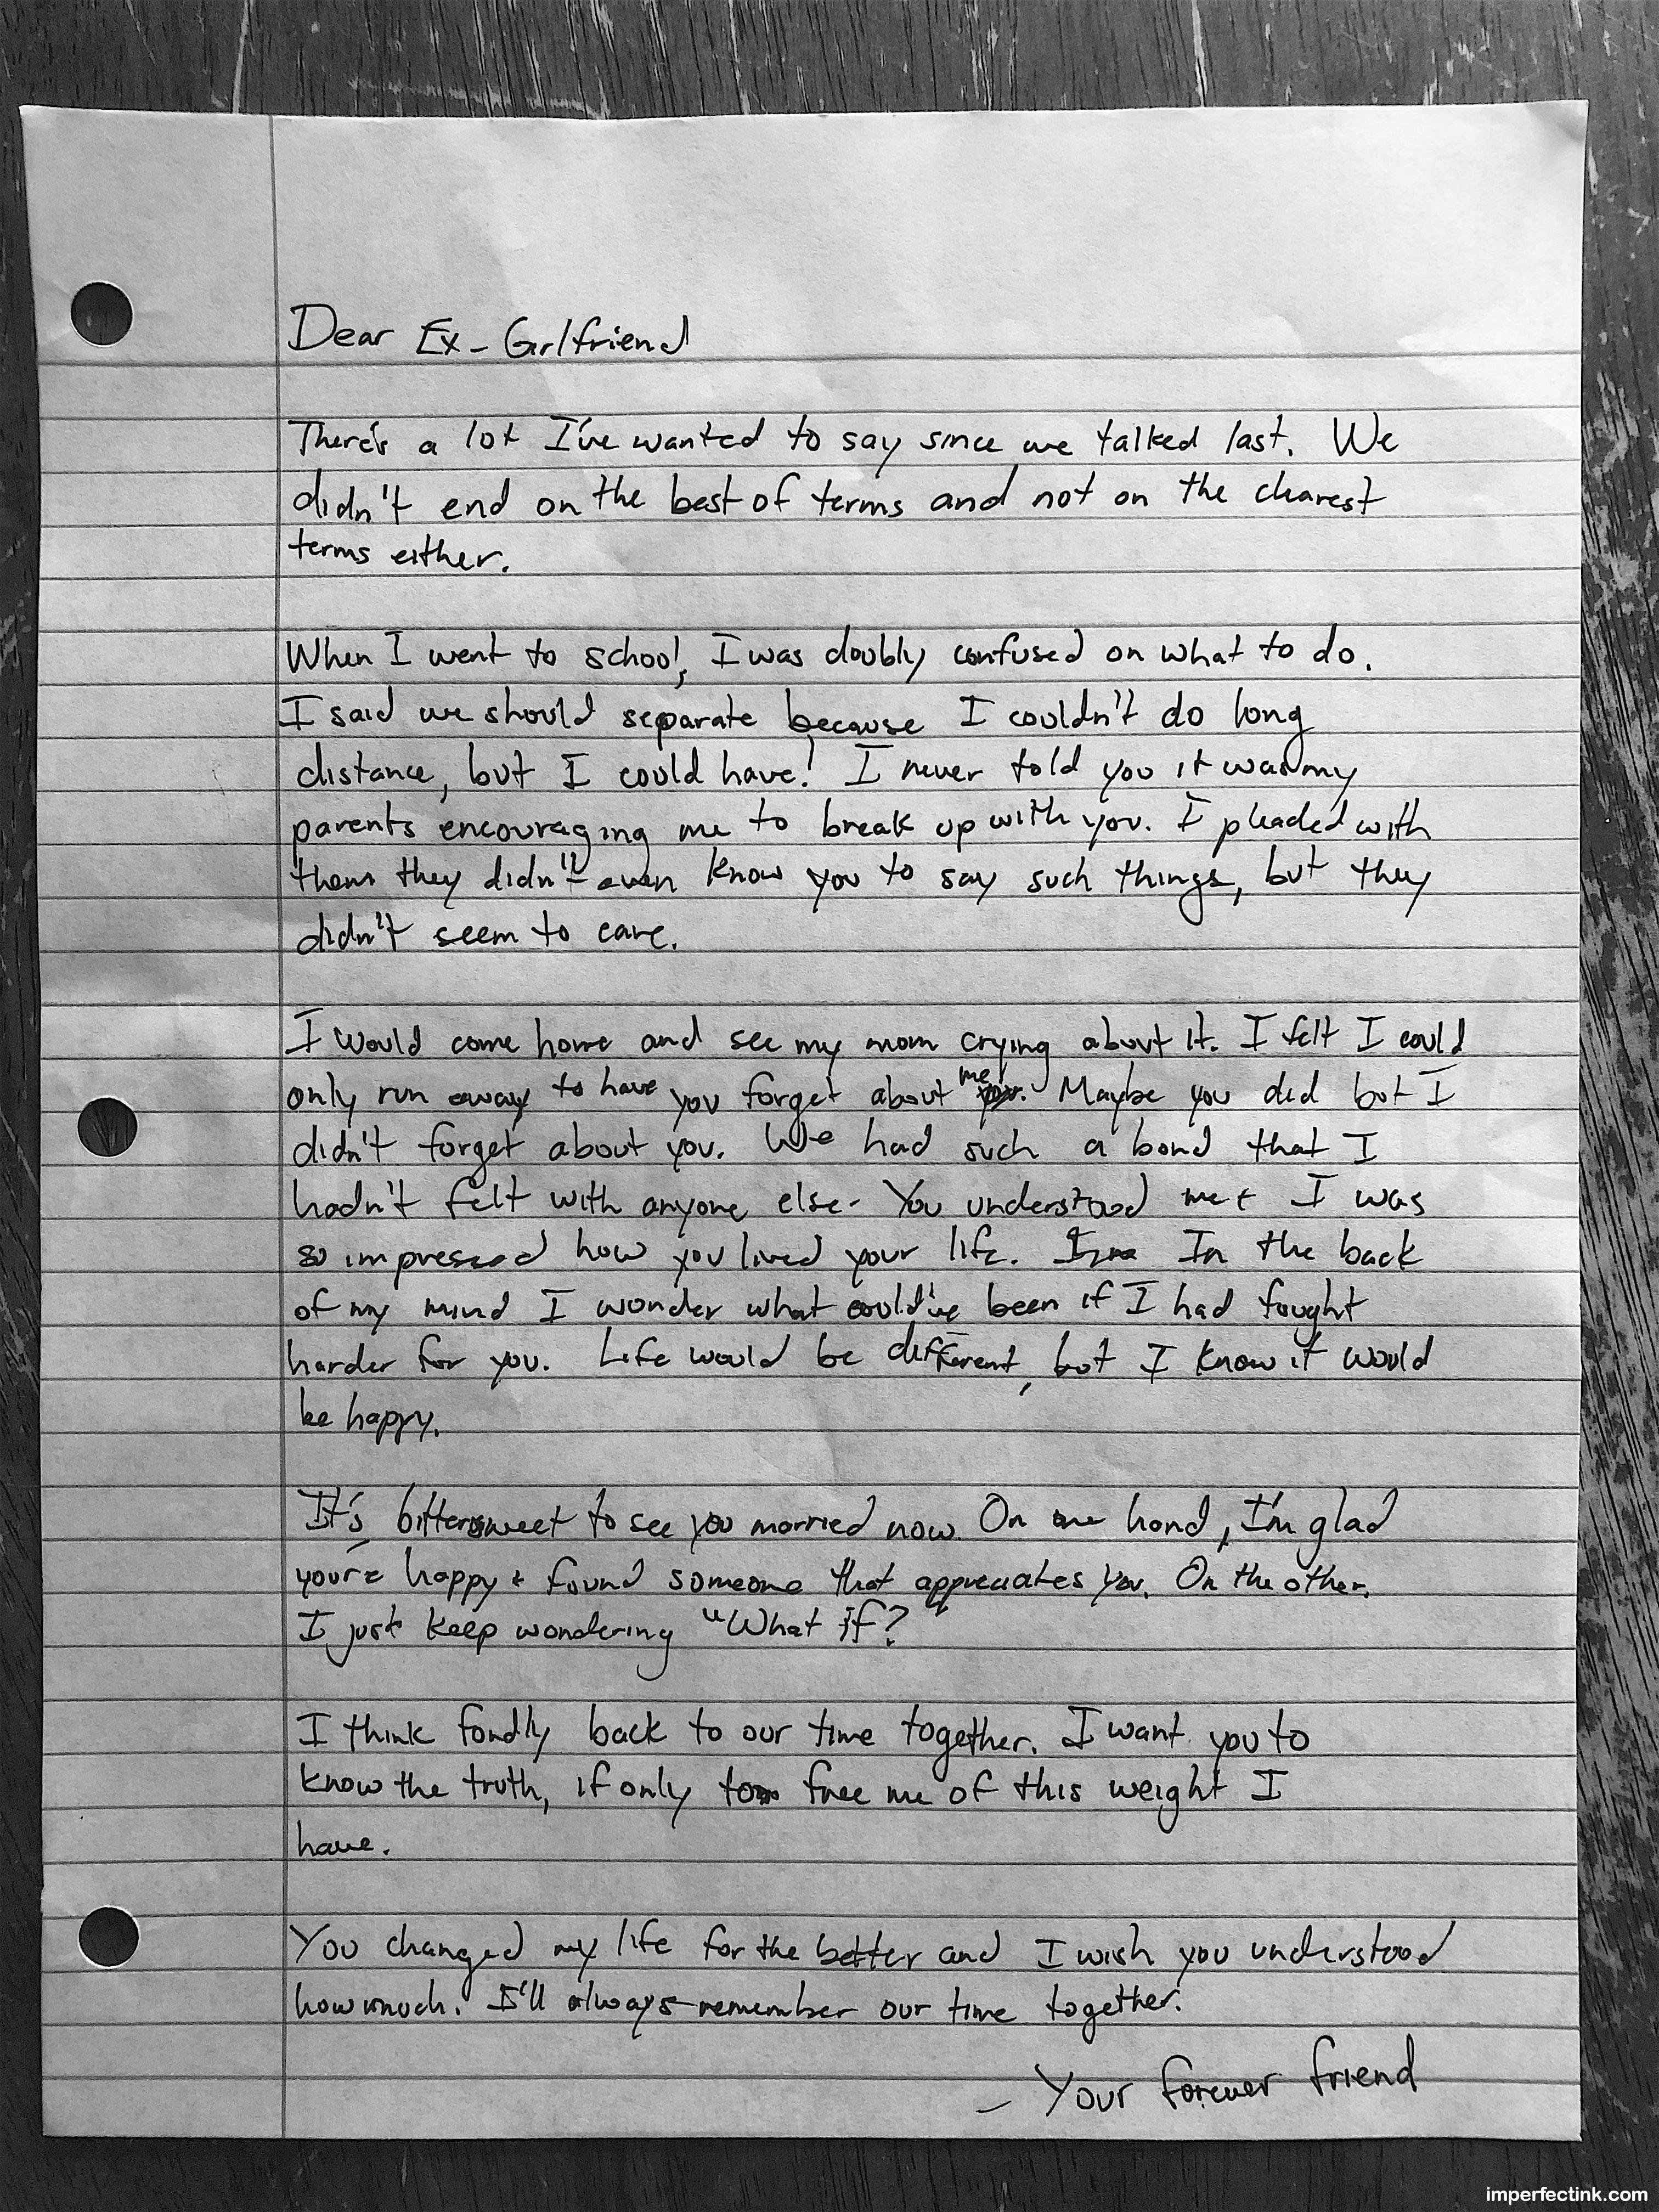 Relationship letters to girlfriend